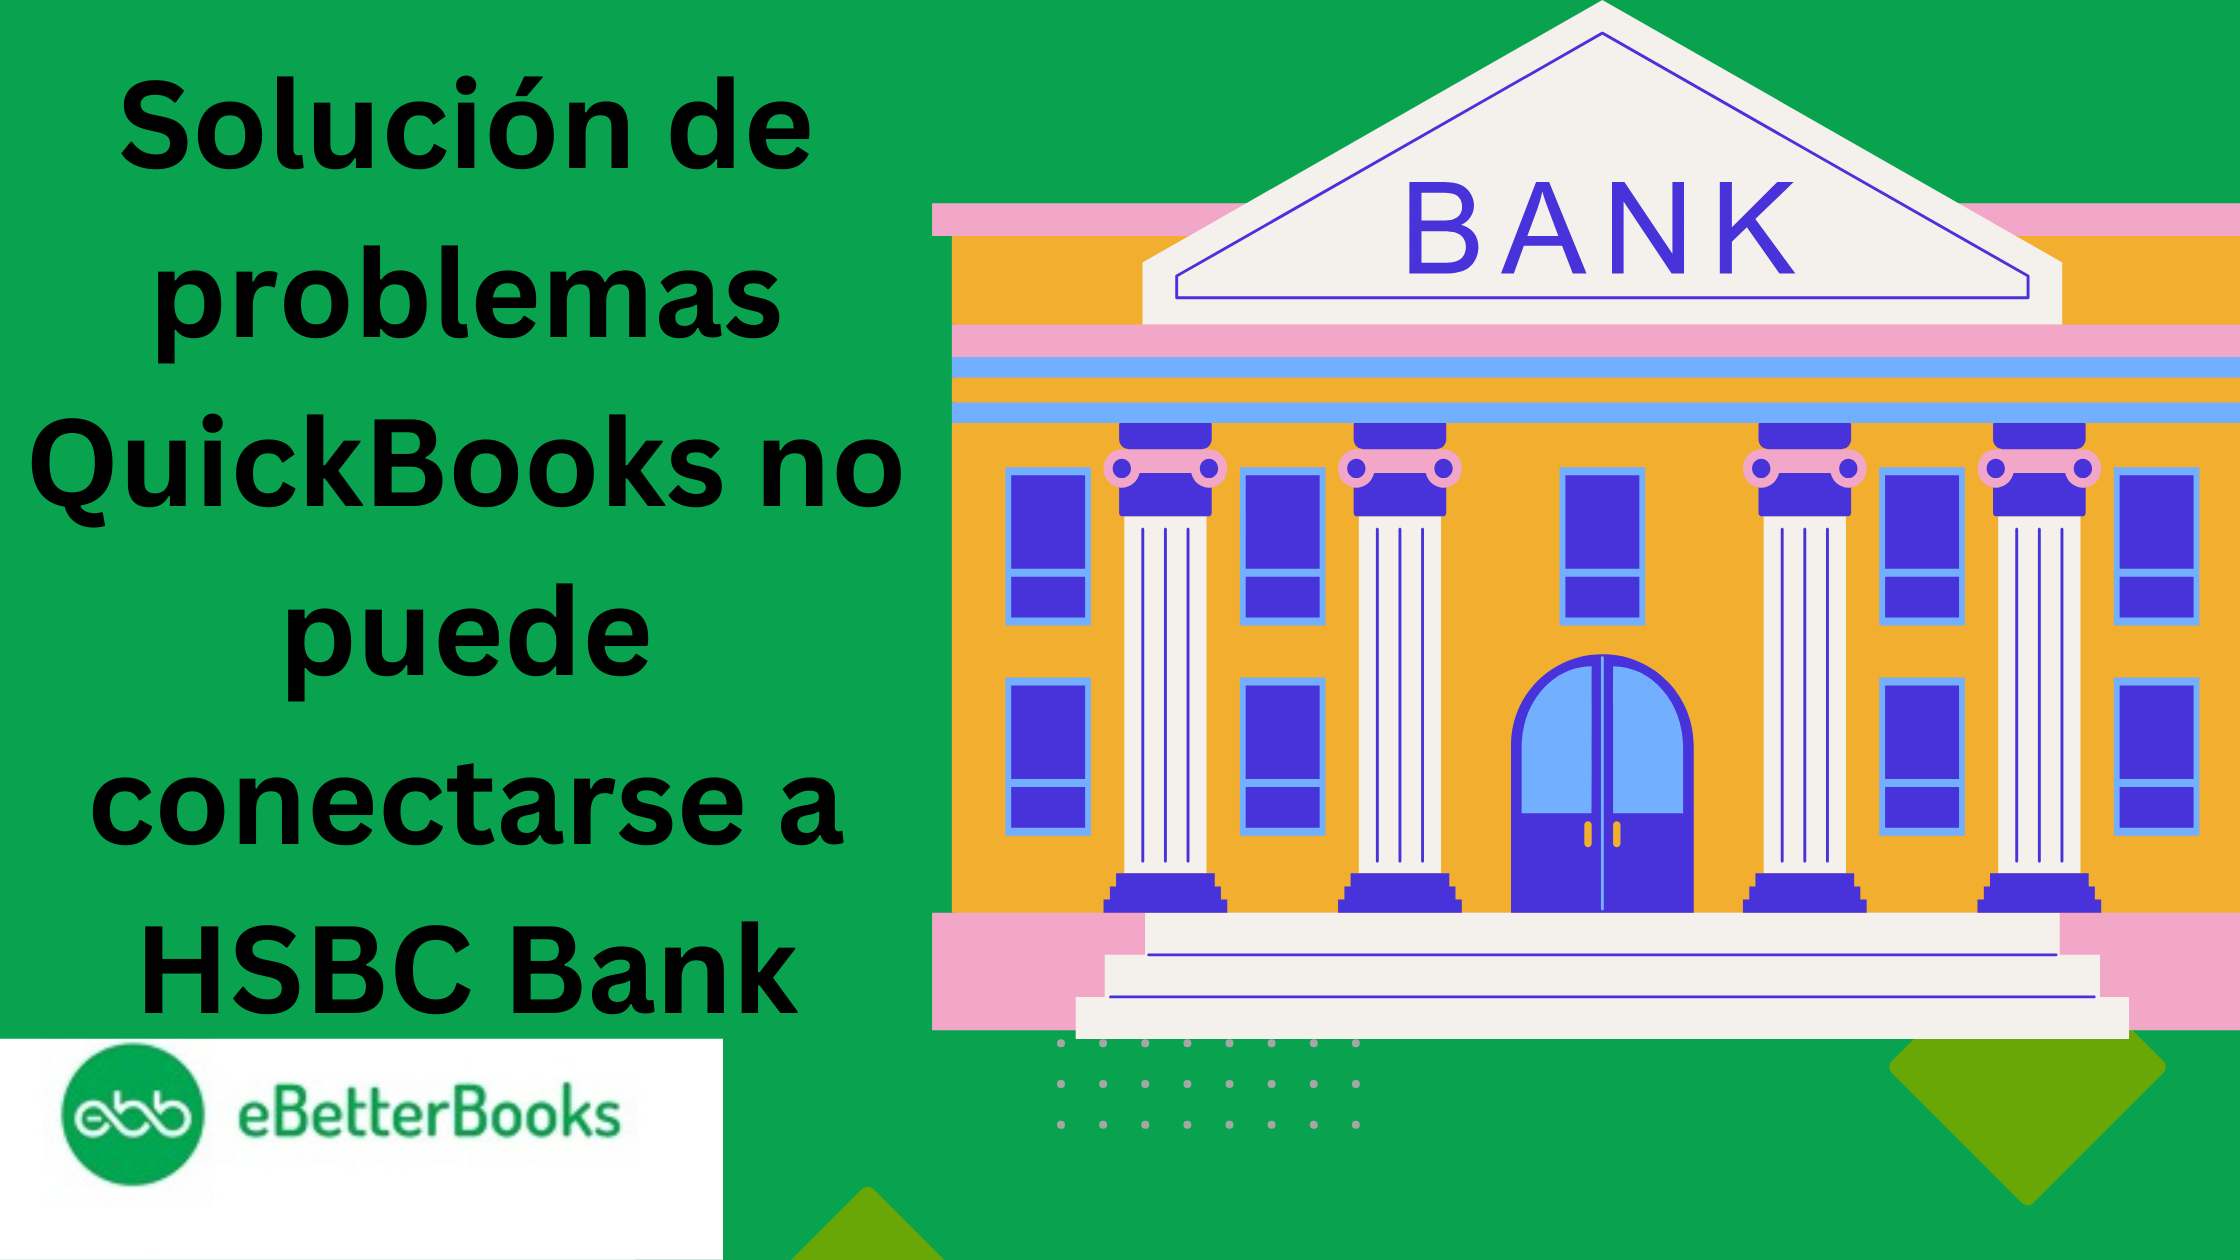 QuickBooks no puede conectarse a HSBC Bank